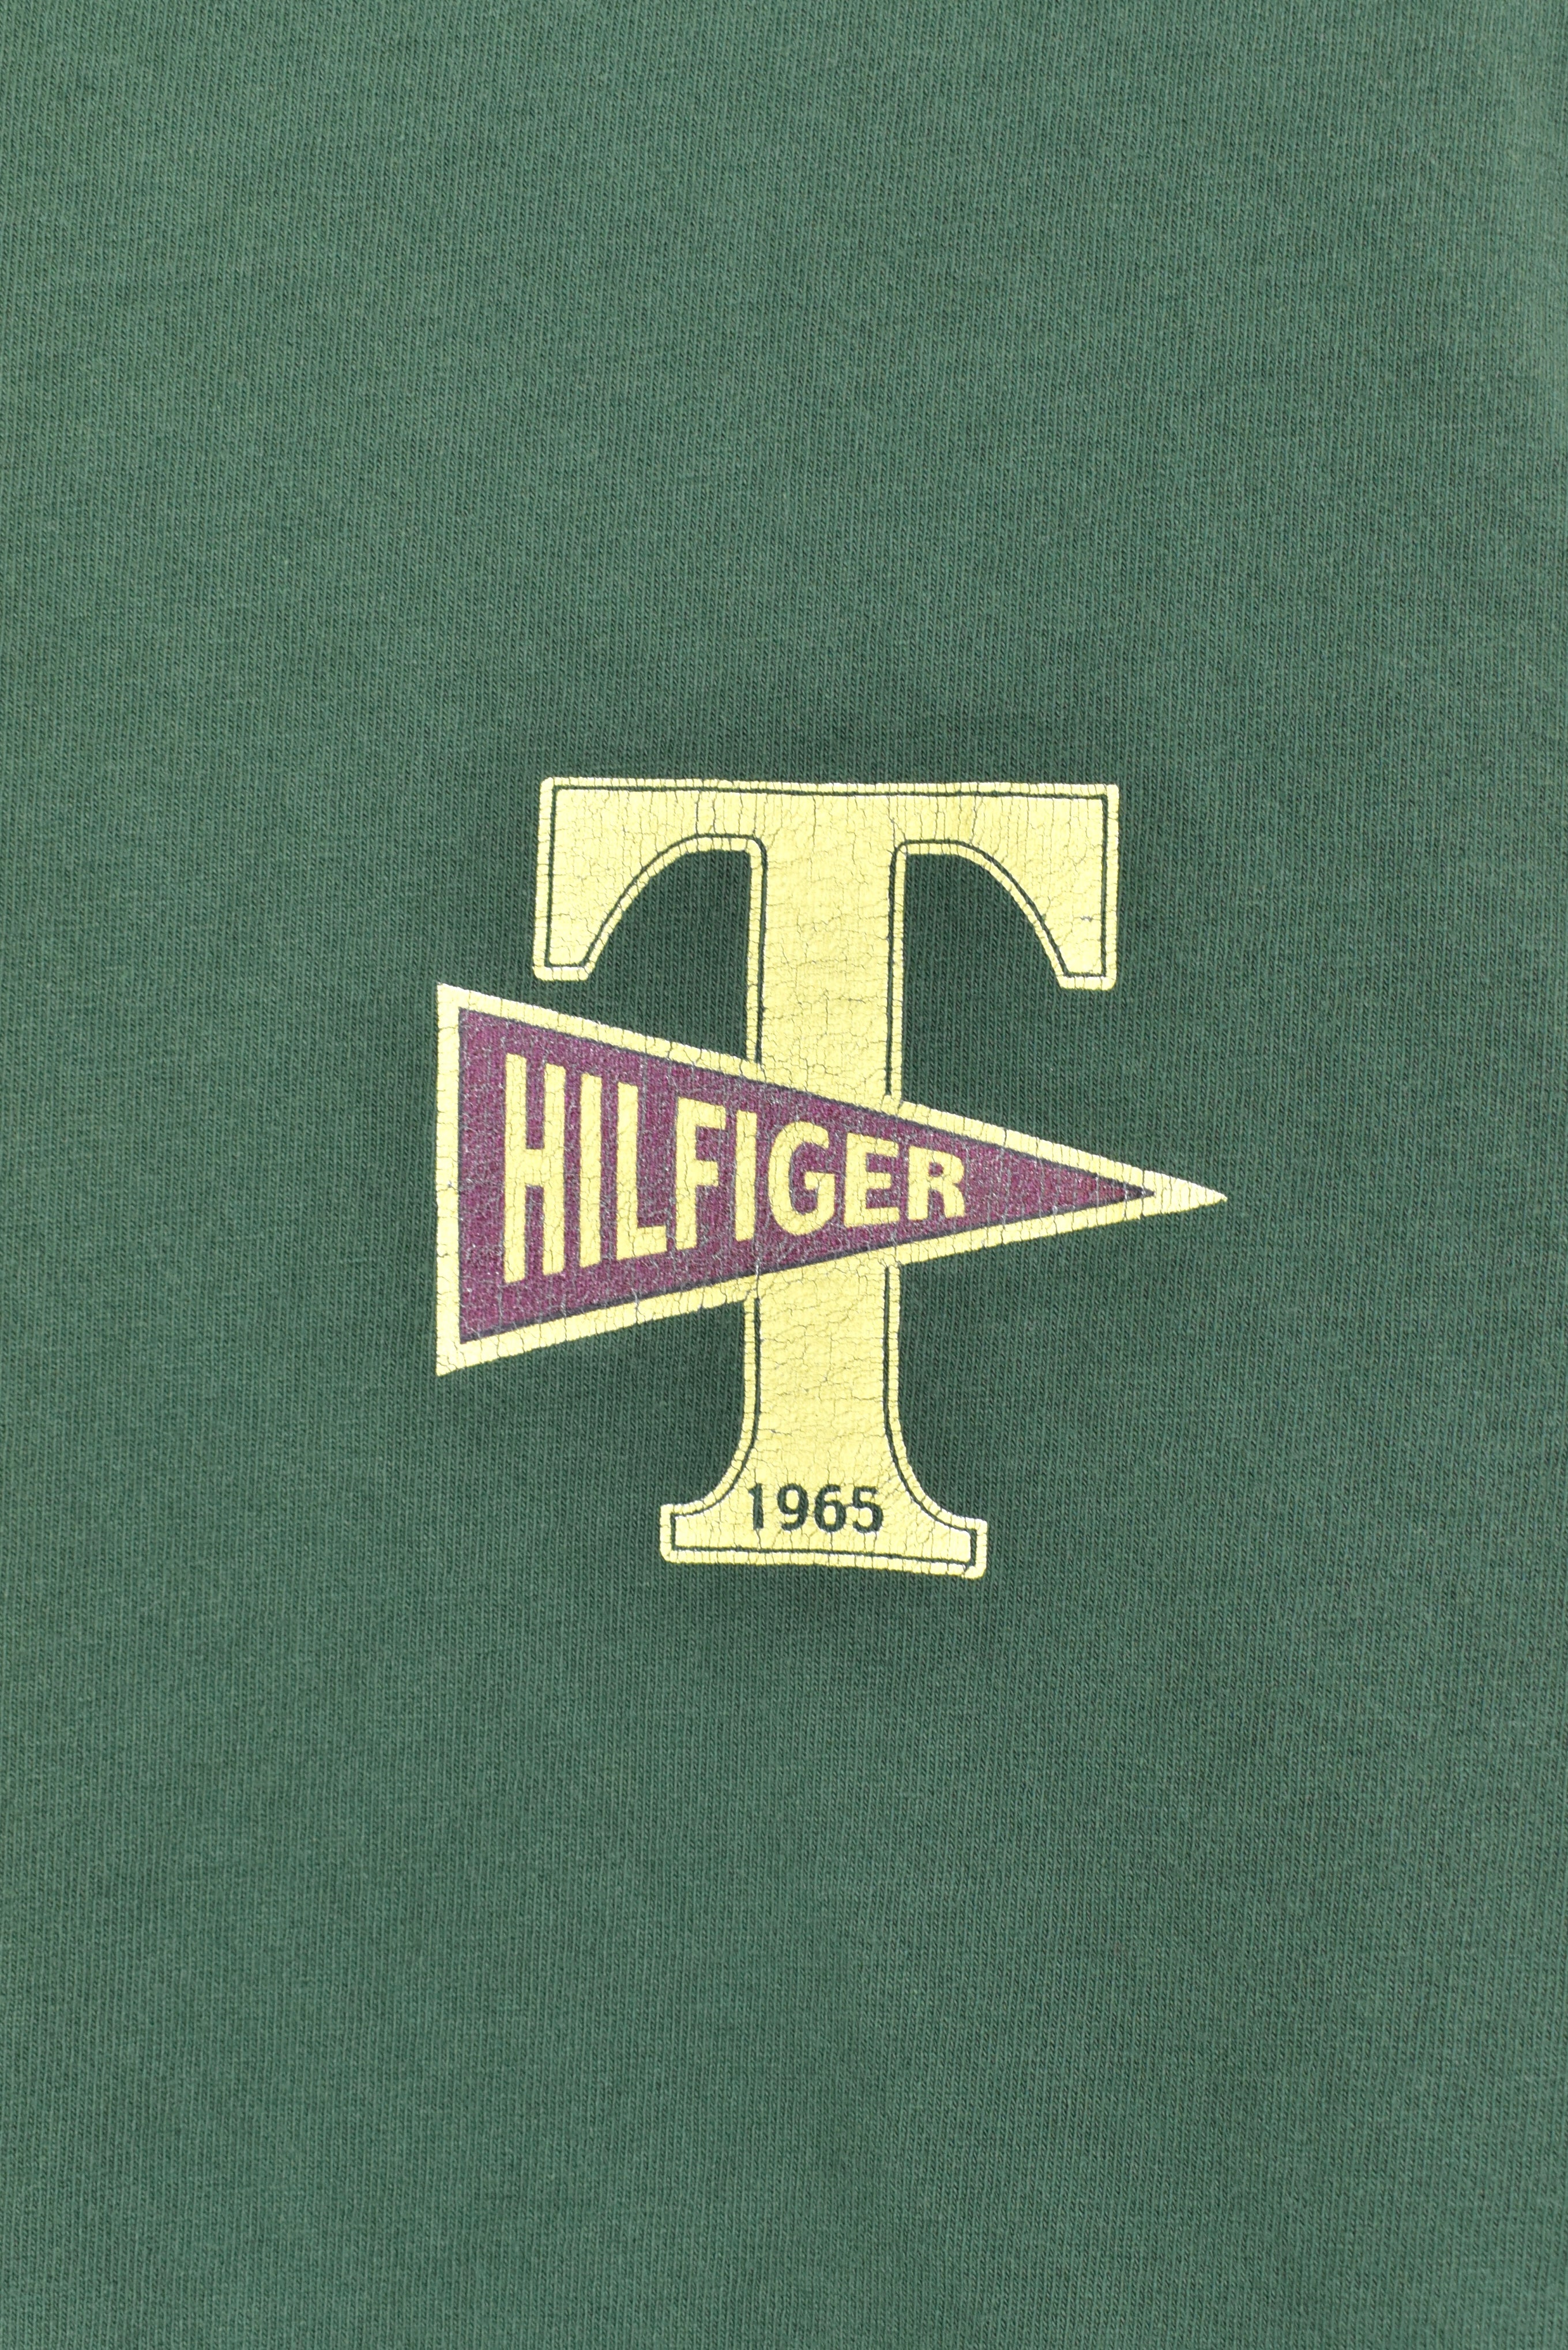 Vintage Tommy Hilfiger shirt, long sleeve graphic tee - large, green TOMMY HILFIGER